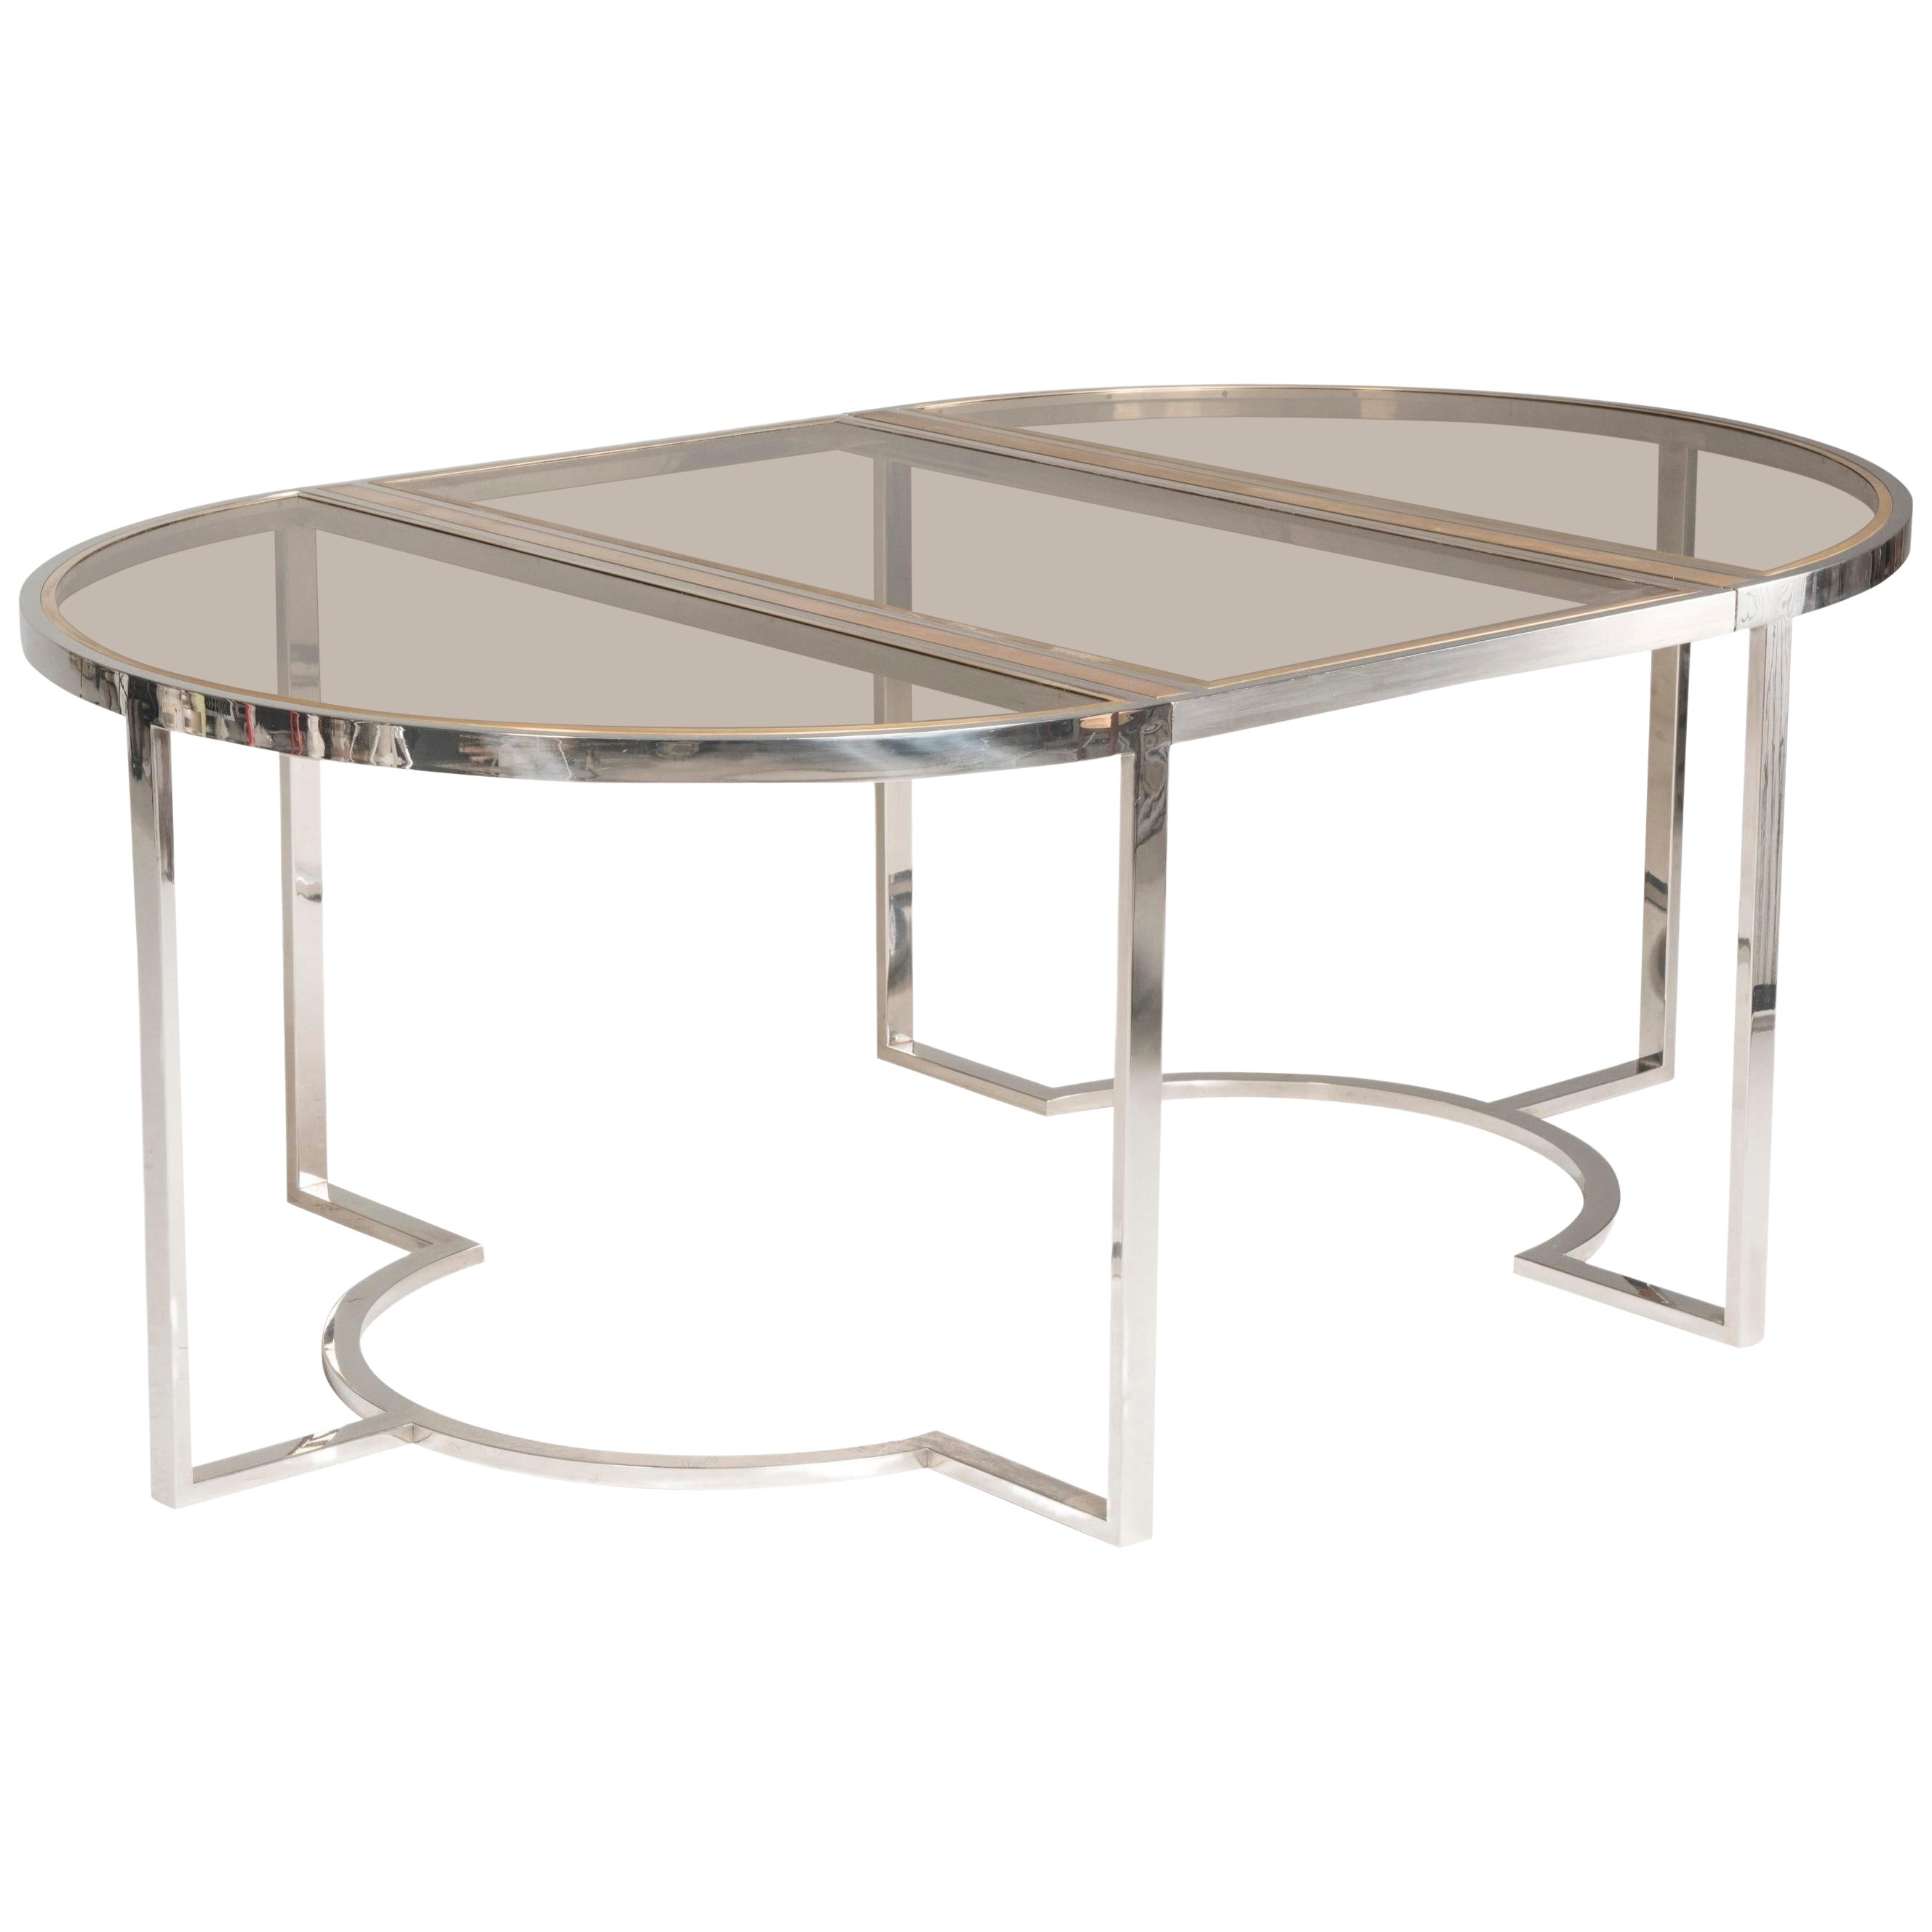 1970s Chromed and Brass Smoked Glass Rounded Extendable Table Att. Romeo Rega